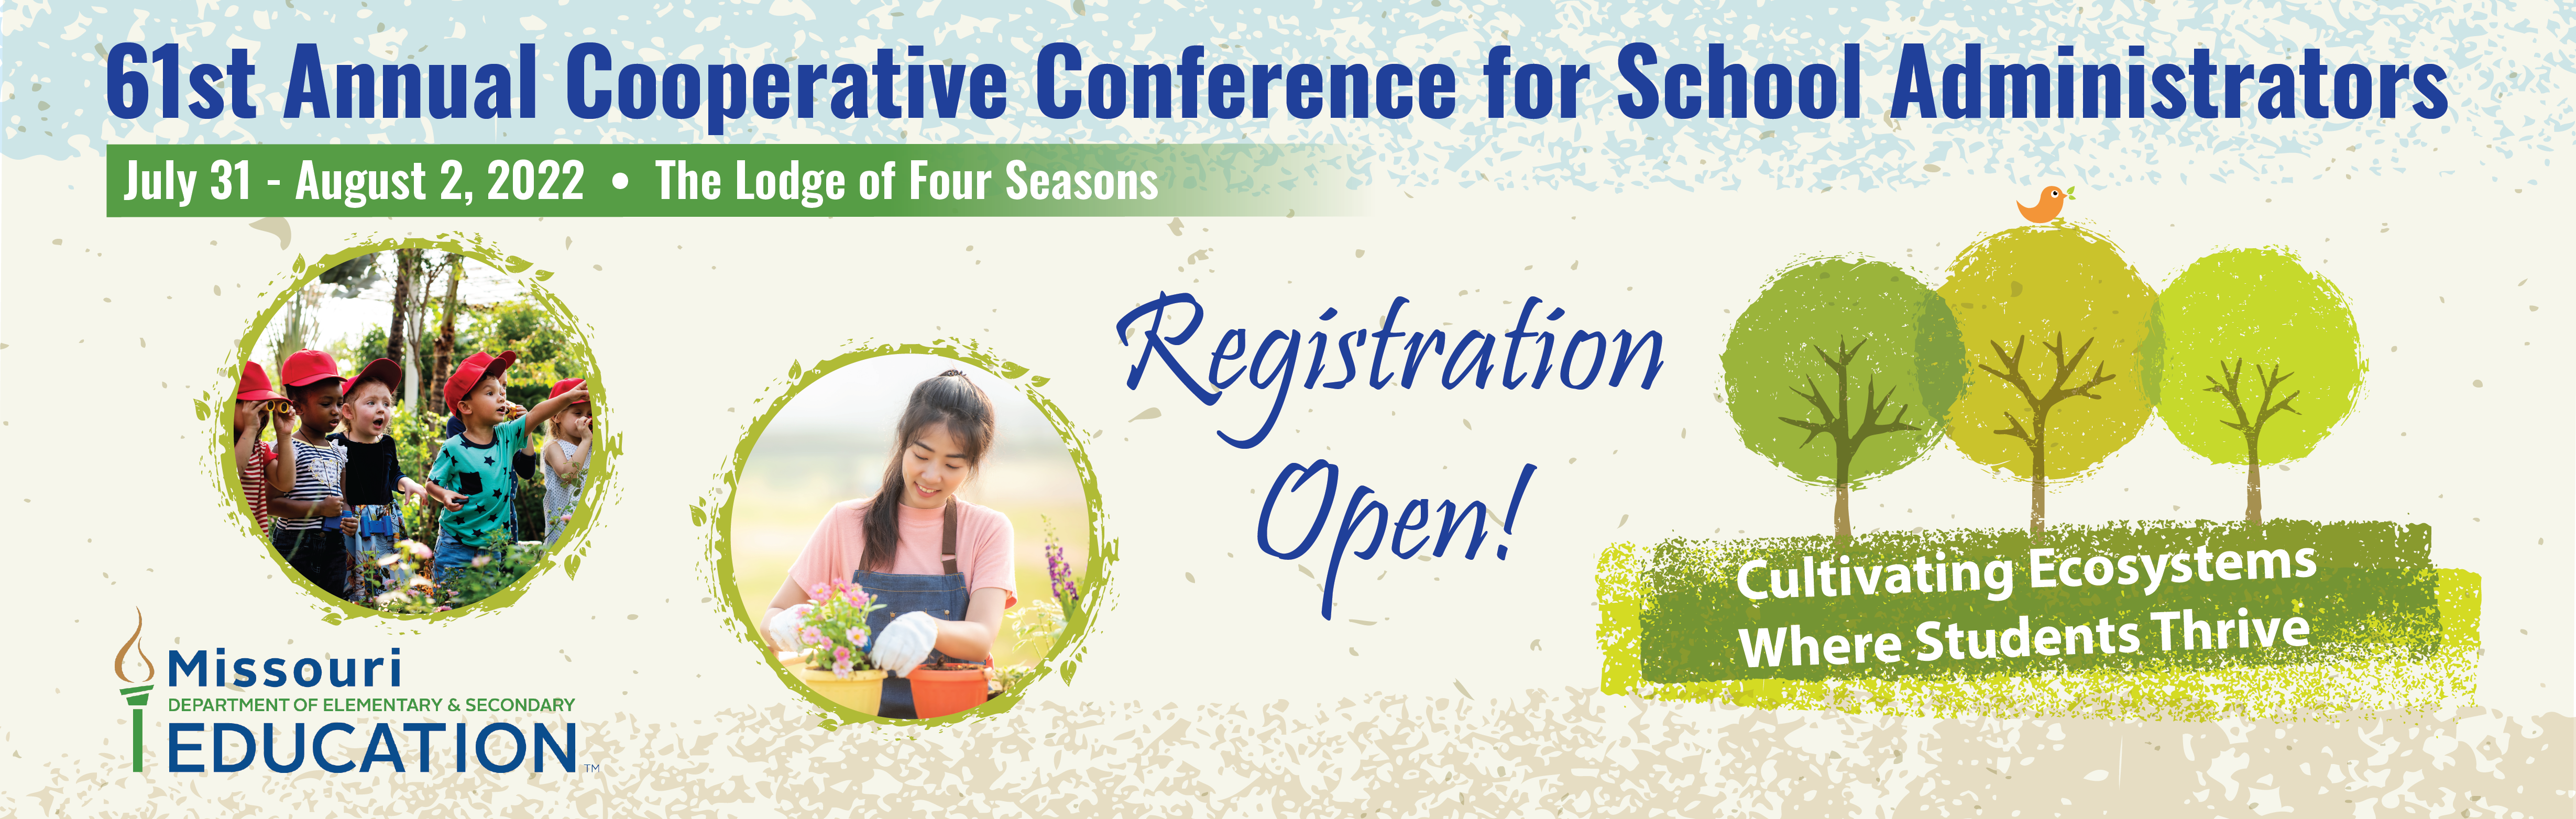 61st Annual Cooperative Conference for School Administrators - Registration Open